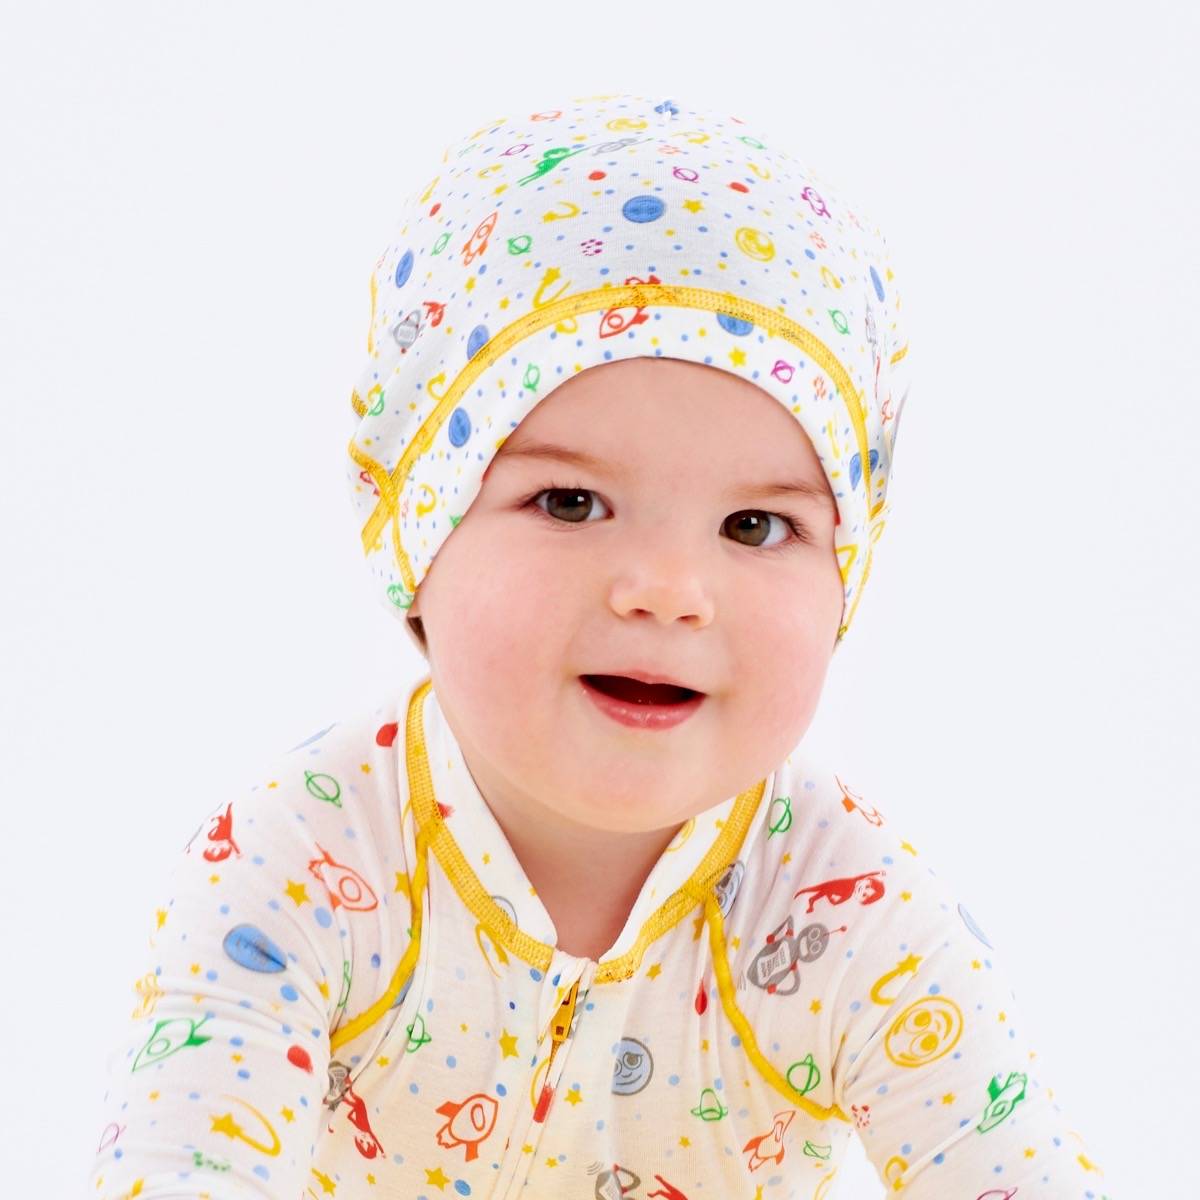 Soothems Eczema Sleep Cap for Toddlers Wet Wrap Therapy | Soothems Itch Relief Clothing 2T-4T(Circumference 20"-21") / White